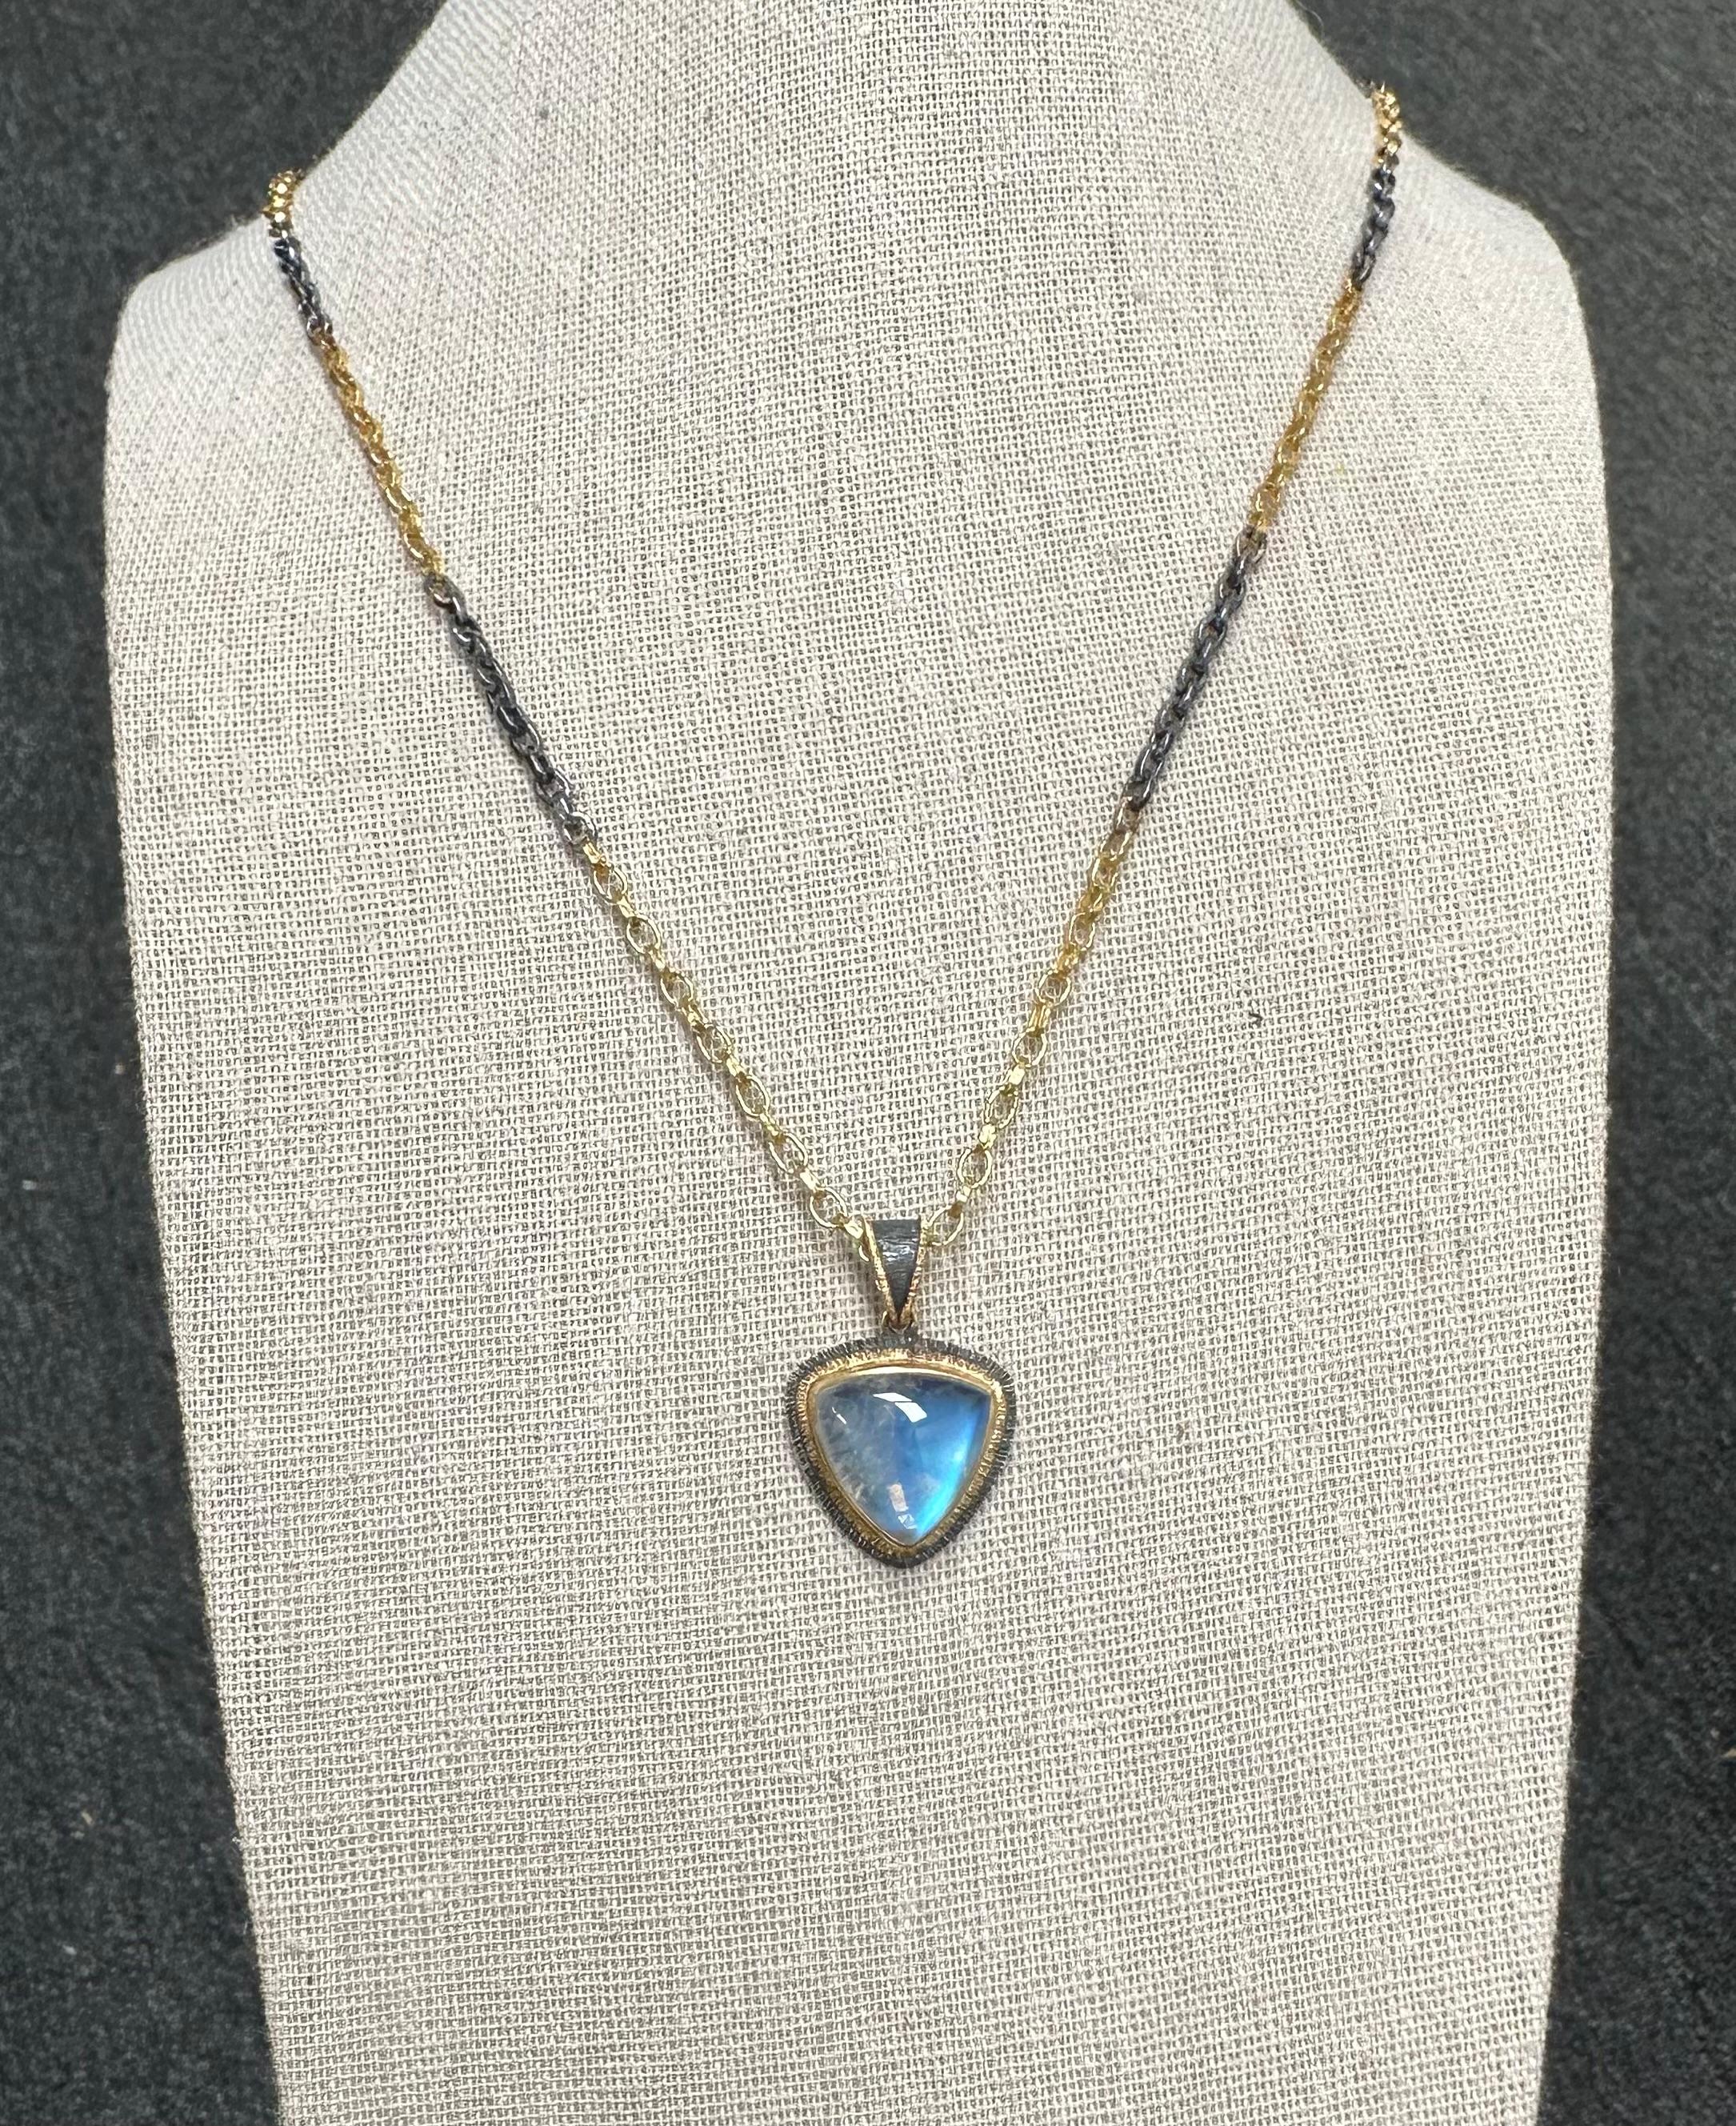 Steven Battelle 10.2 Carats Rainbow Moonstone Silver/18K Pendant With Chain For Sale 5